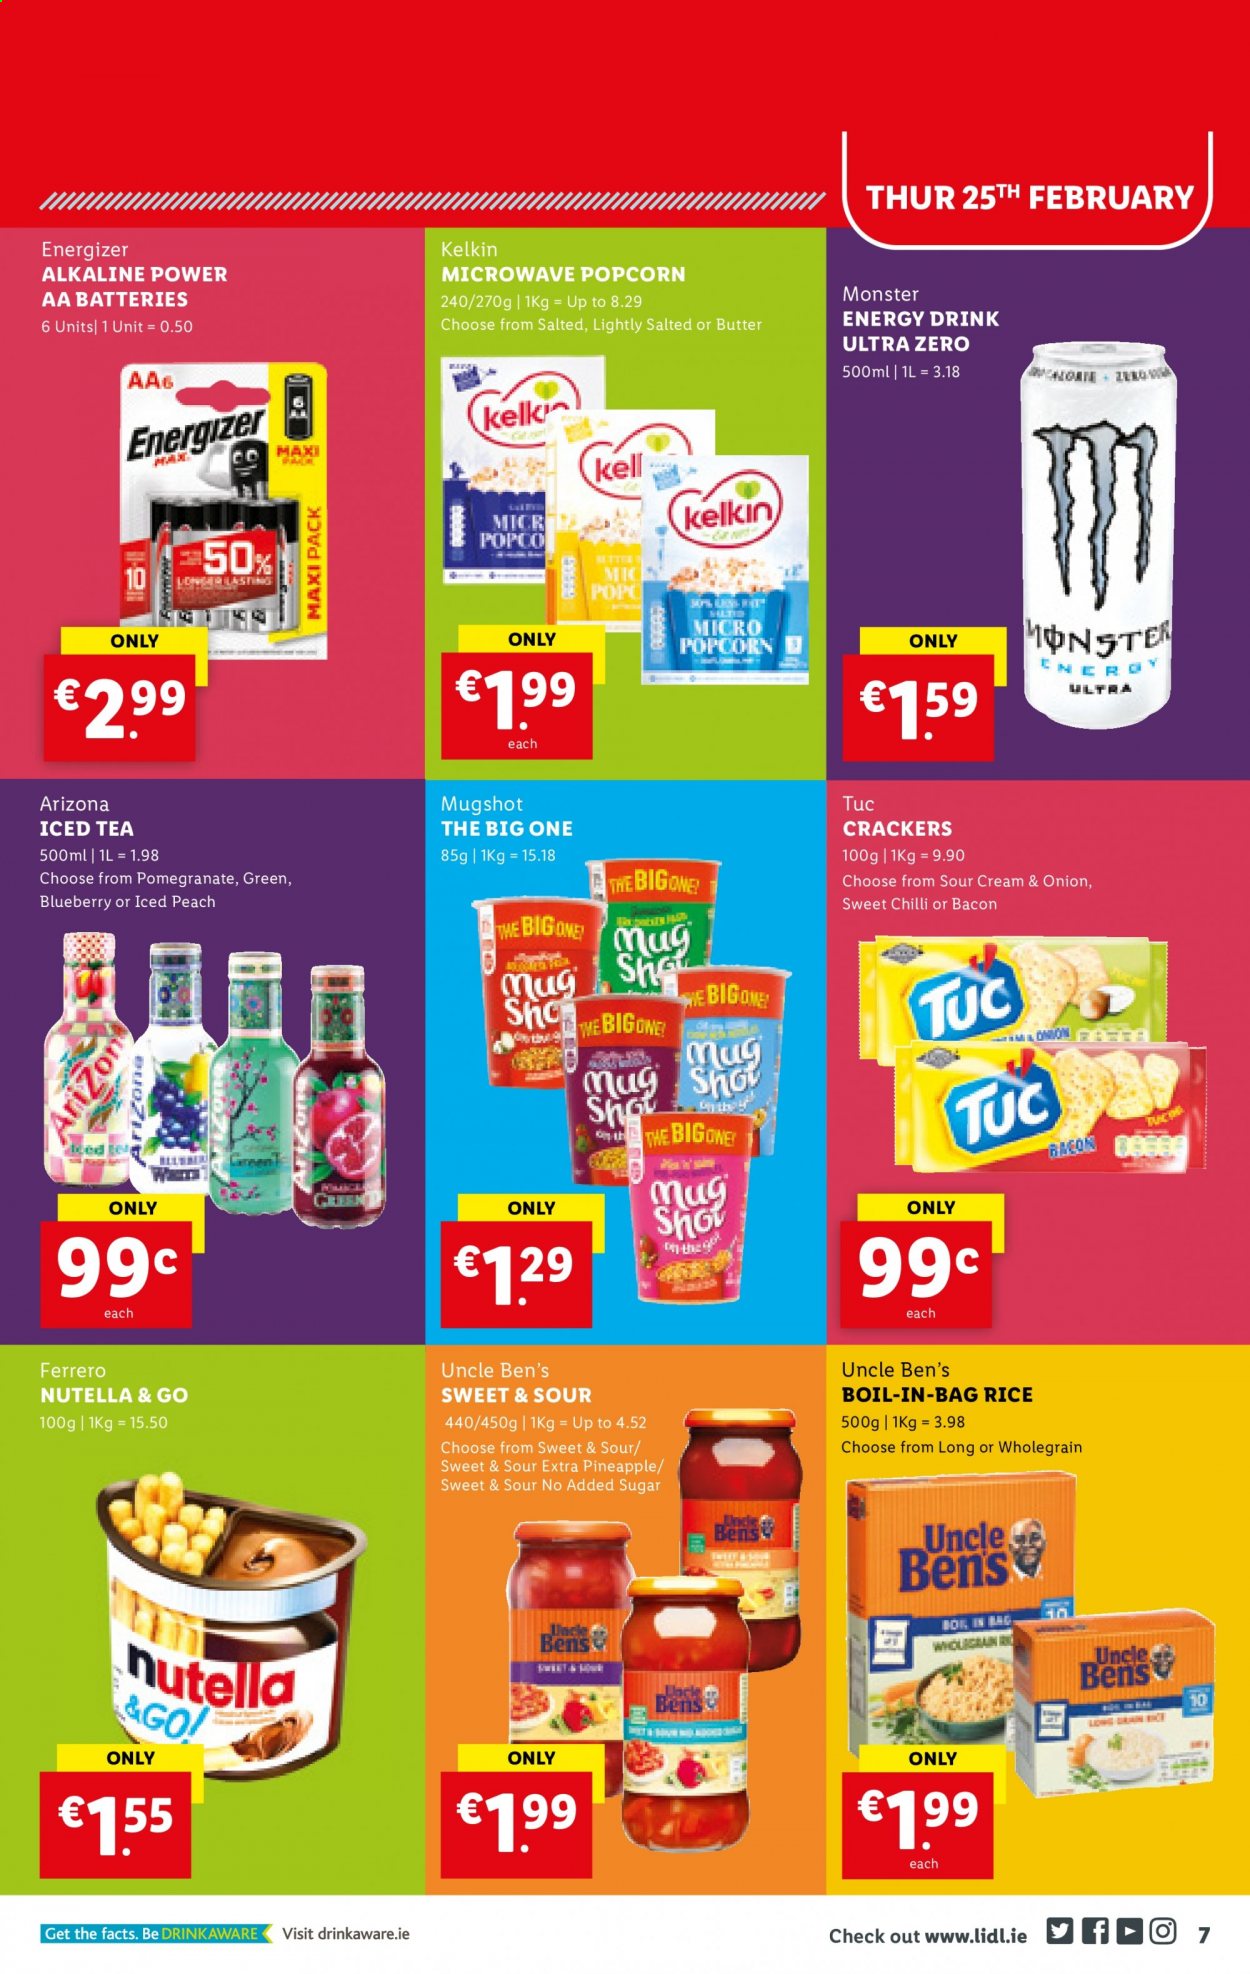 thumbnail - Lidl offer  - 25.02.2021 - 03.03.2021 - Sales products - pineapple, pomegranate, bacon, butter, Nutella, Ferrero Rocher, crackers, popcorn, Uncle Ben's, rice, energy drink, Monster, Monster Energy, AriZona, Energizer, aa batteries, microwave. Page 9.